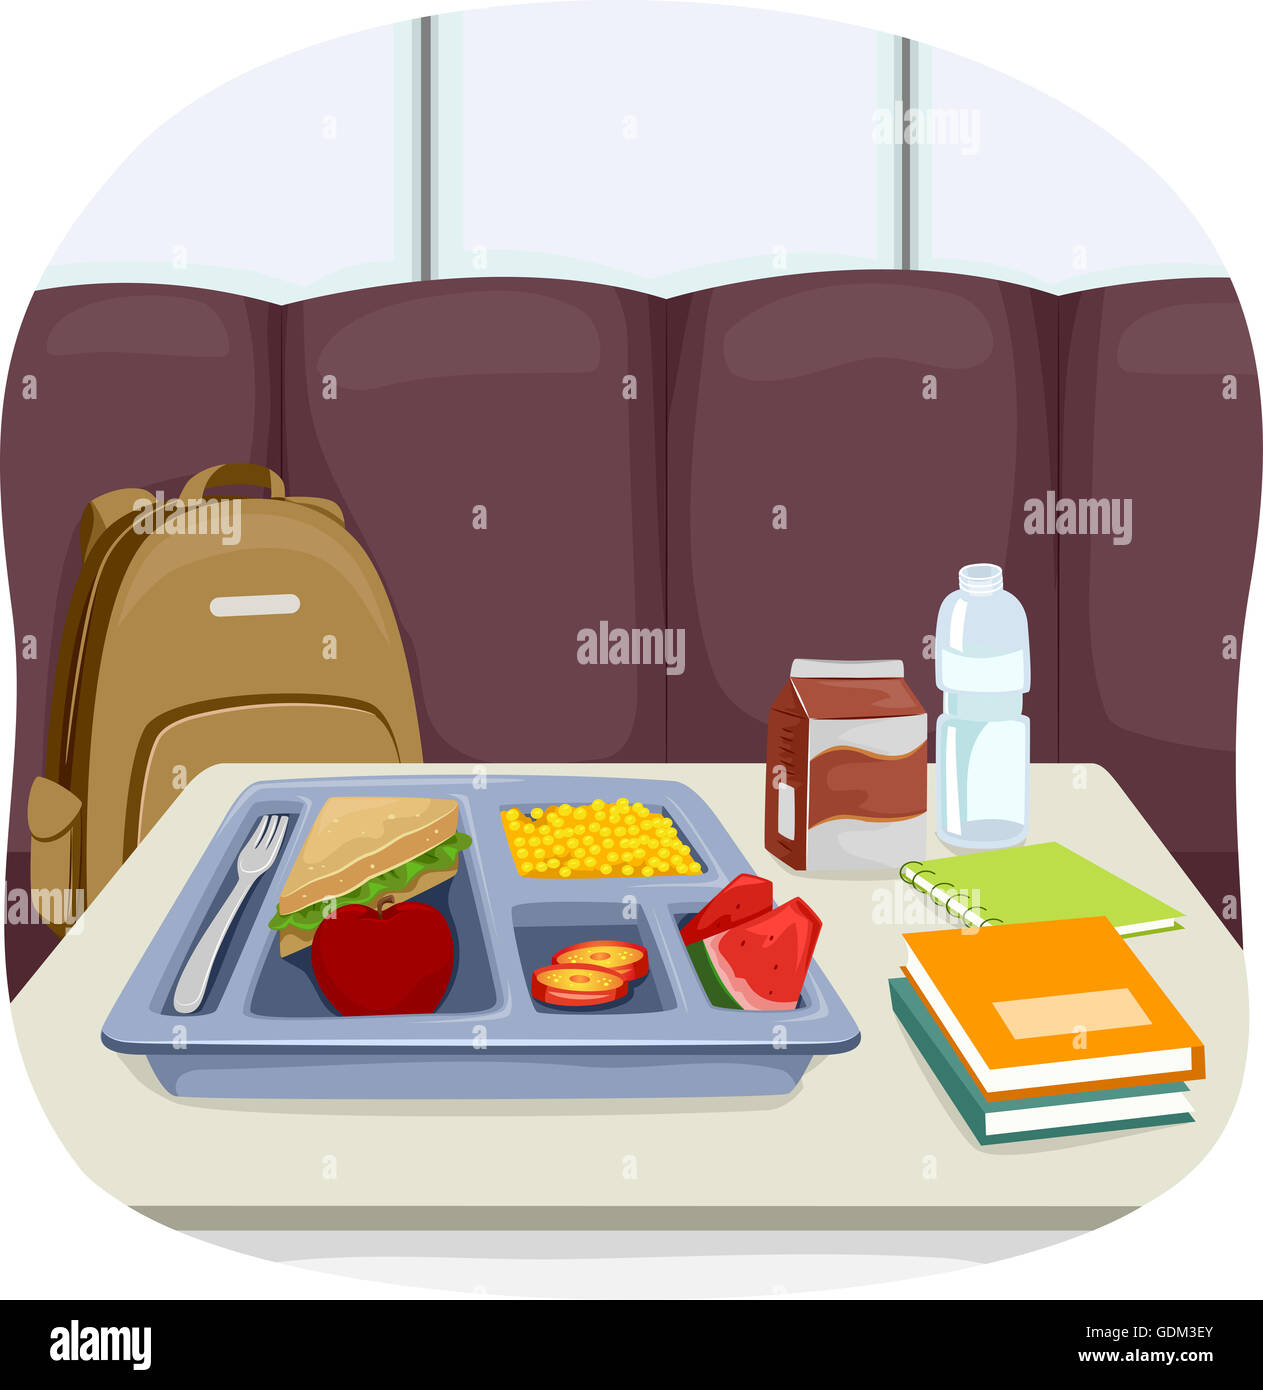 Illustration of a Tray of School Lunch Sitting in the Middle of